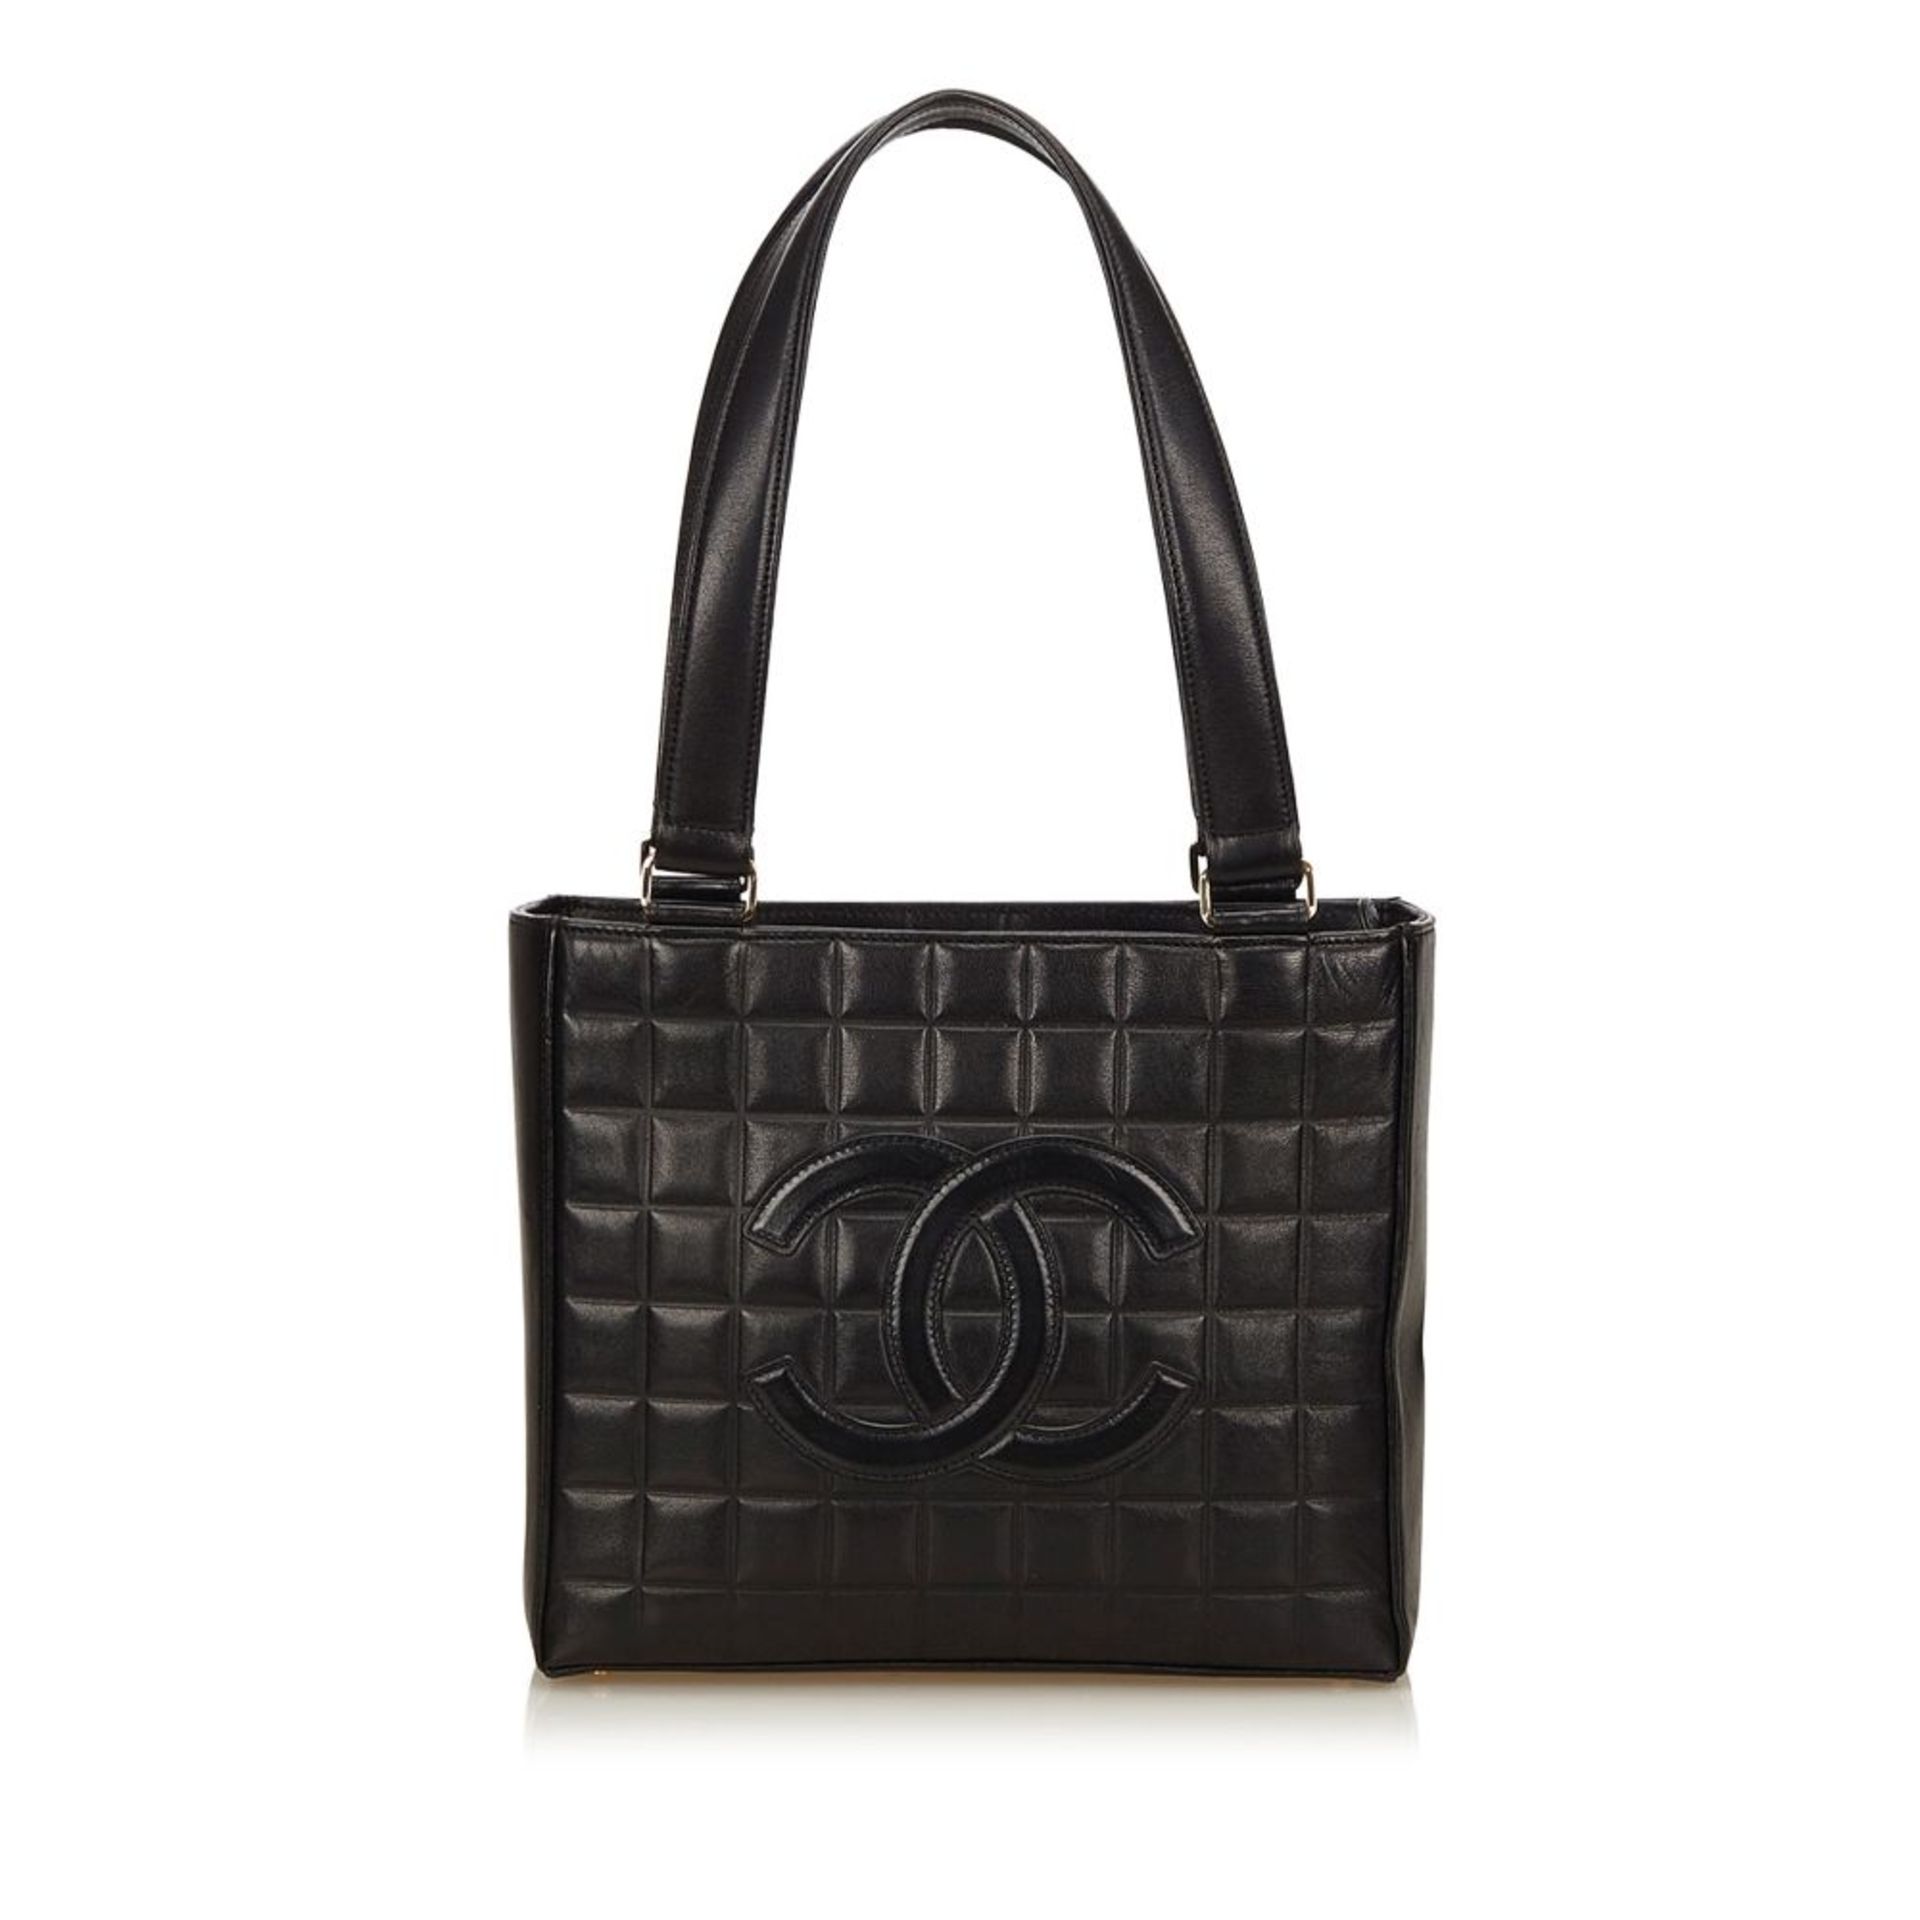 A Chanel 'Choco Bar' leather shoulder bag,with a leather body, a flat leather strap, an open top,